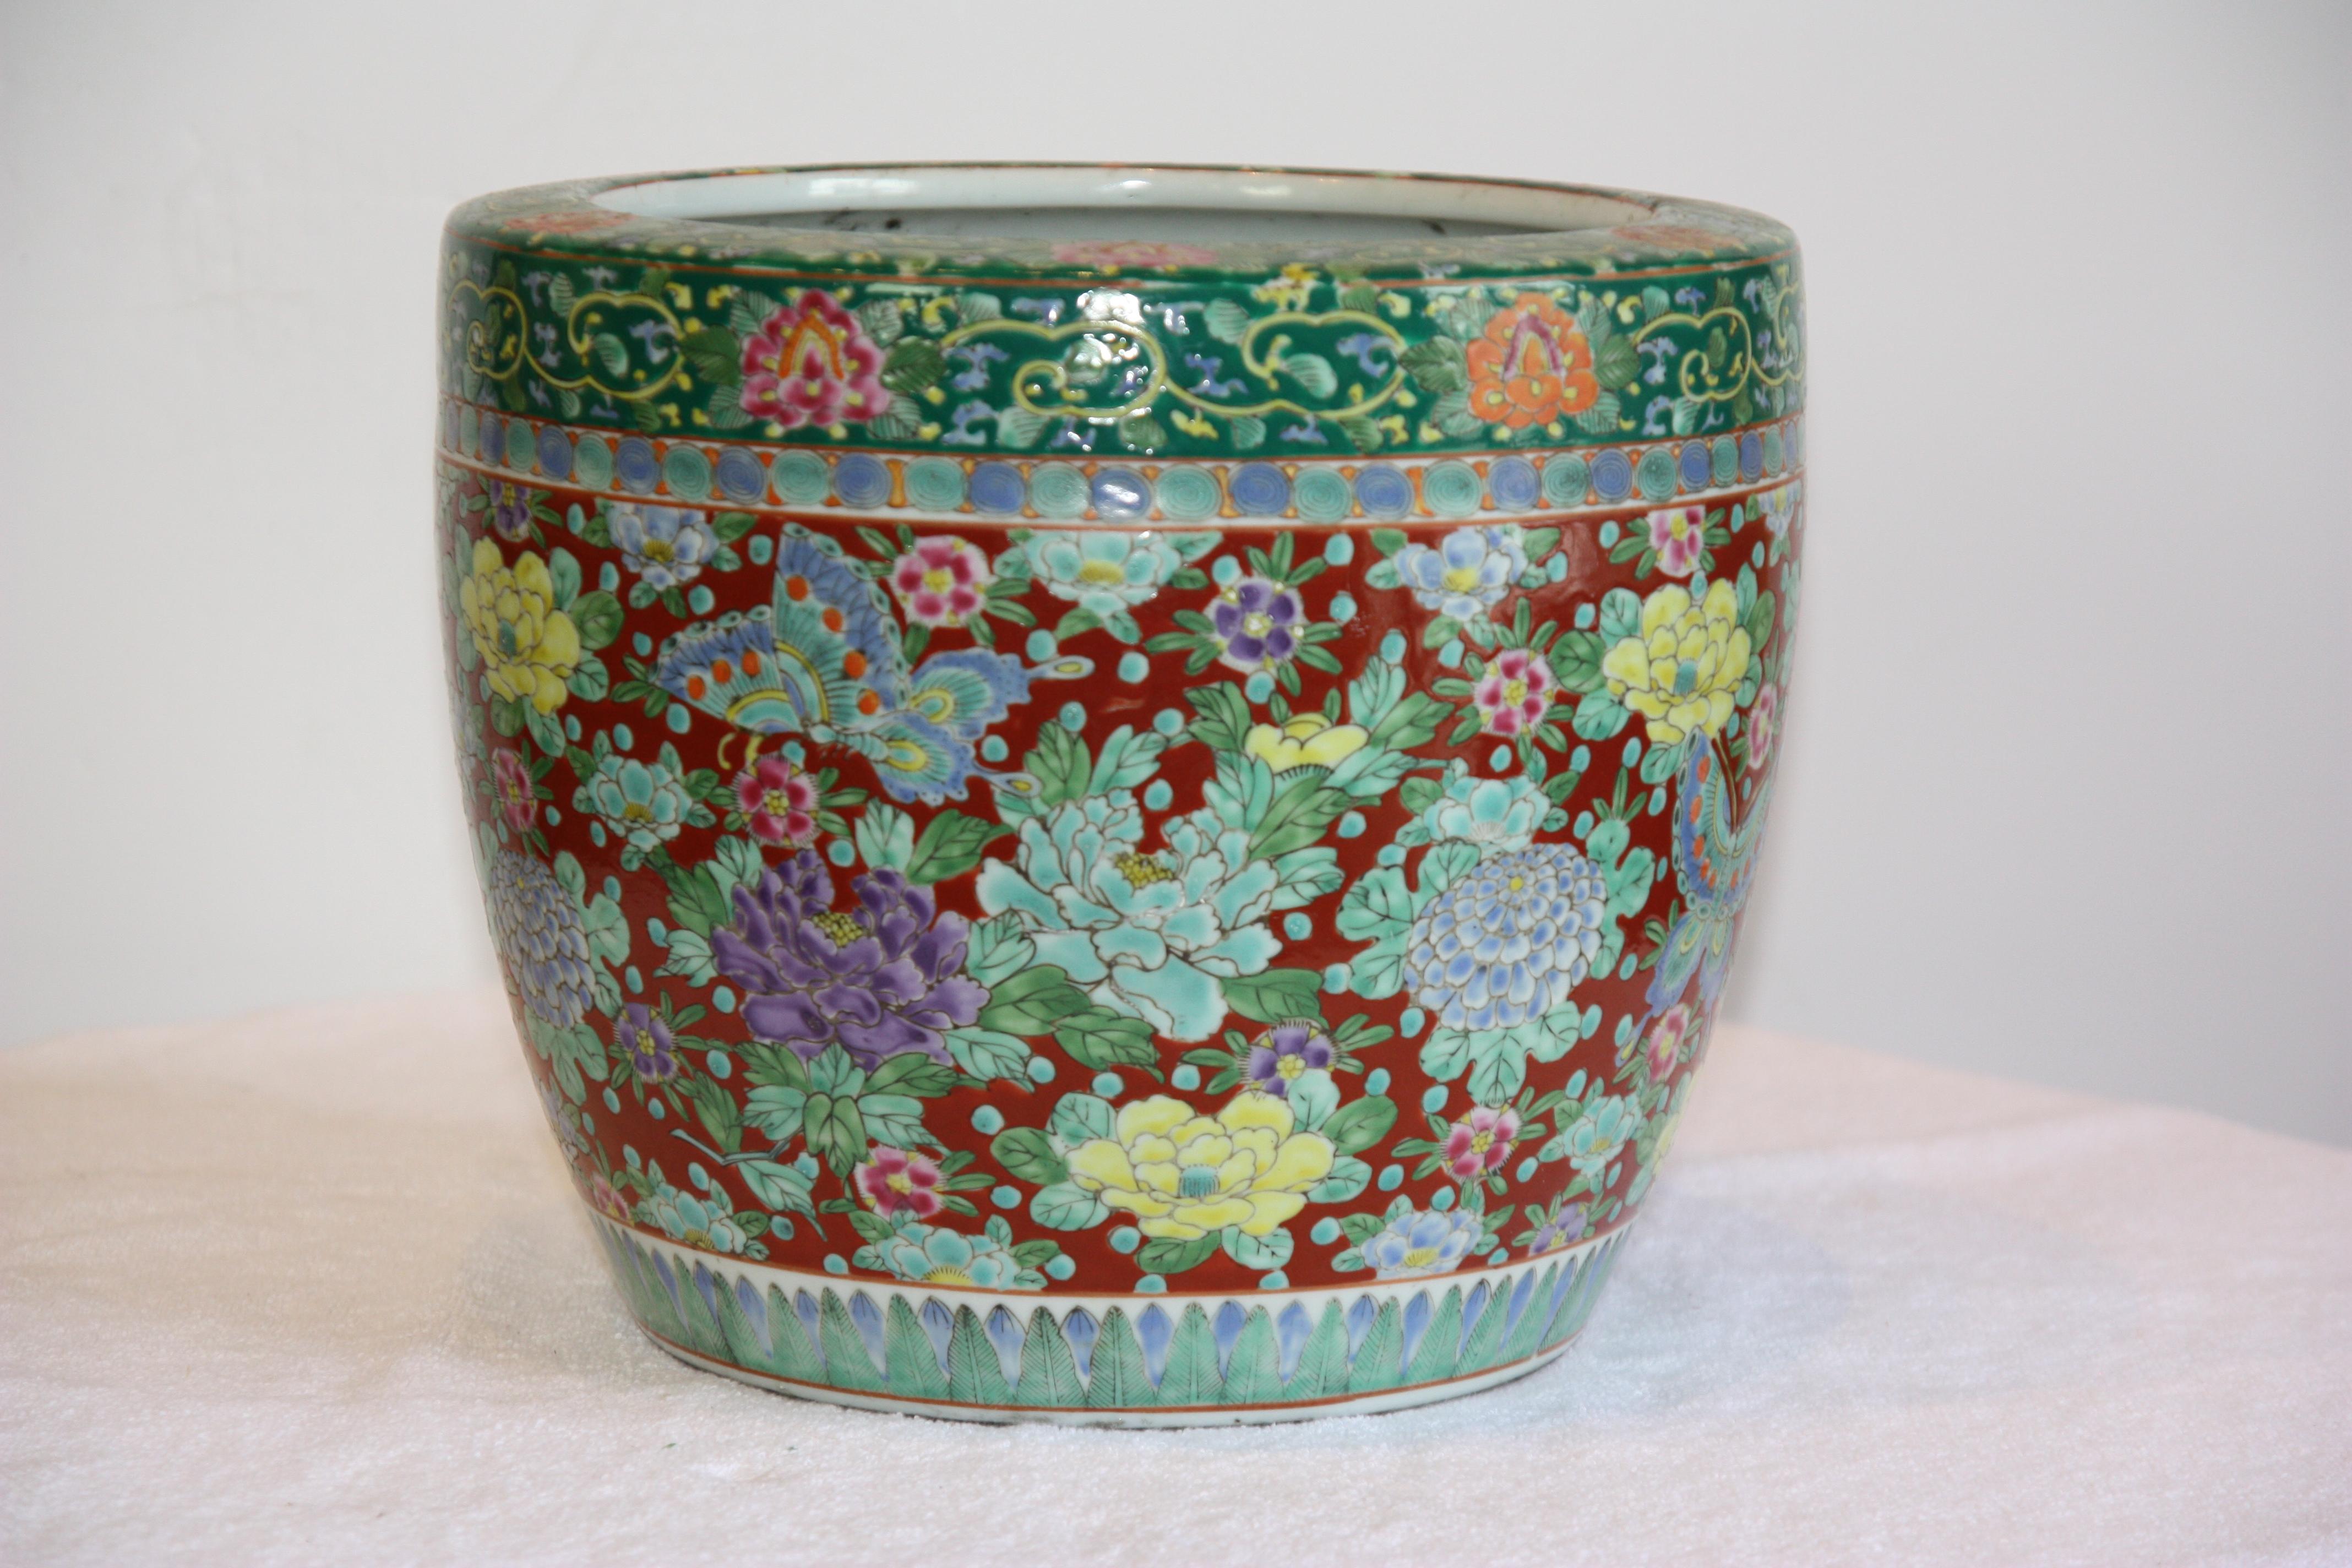 Gorgeous pair of late 19th century hand-painted, green and red jardinières with flowers adorning them.